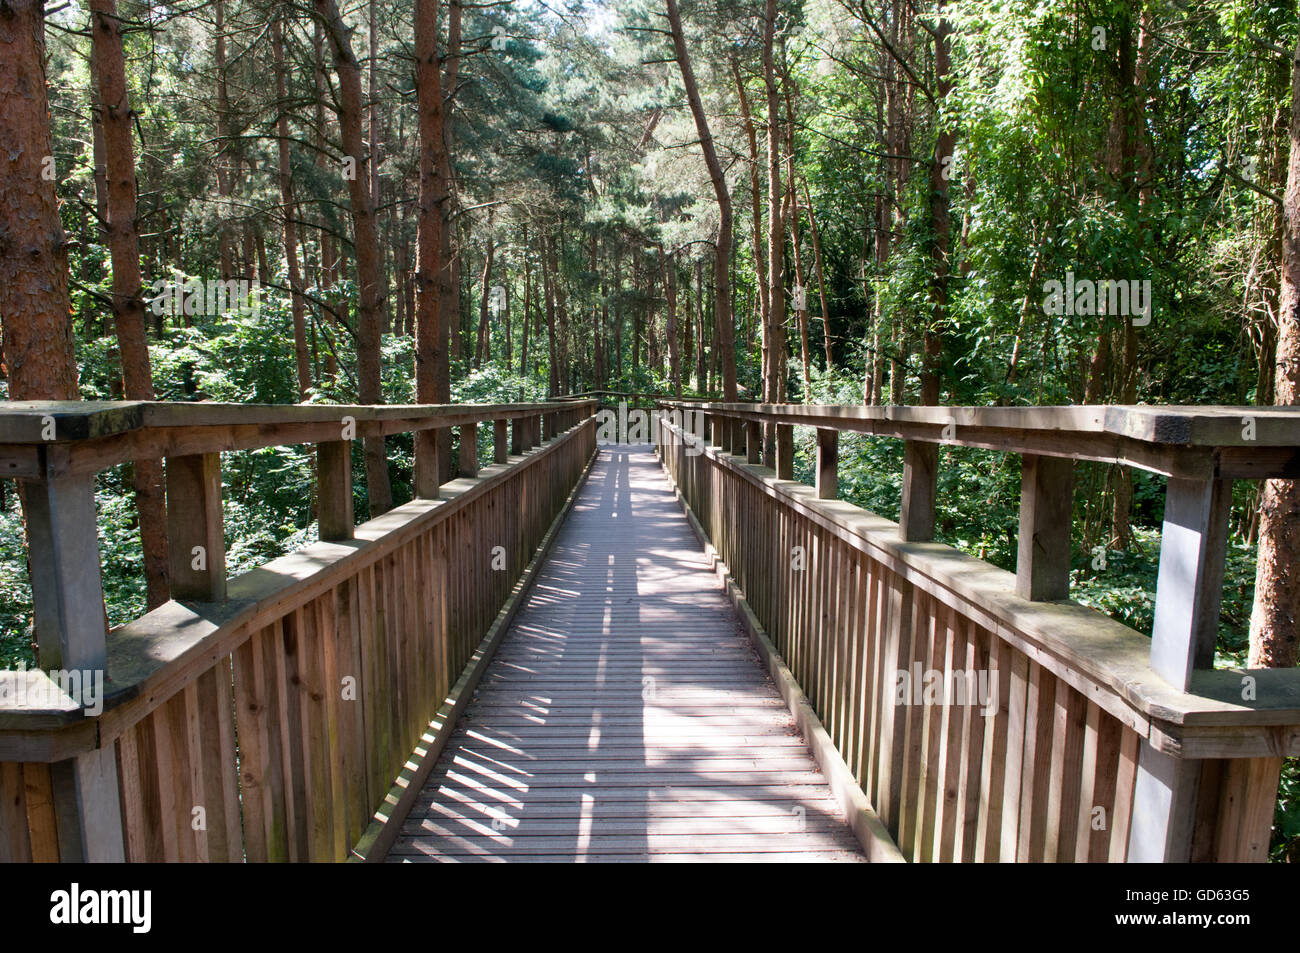 Wooden footbridge crossing high up over a forest. Looking down from above the trees Stock Photo